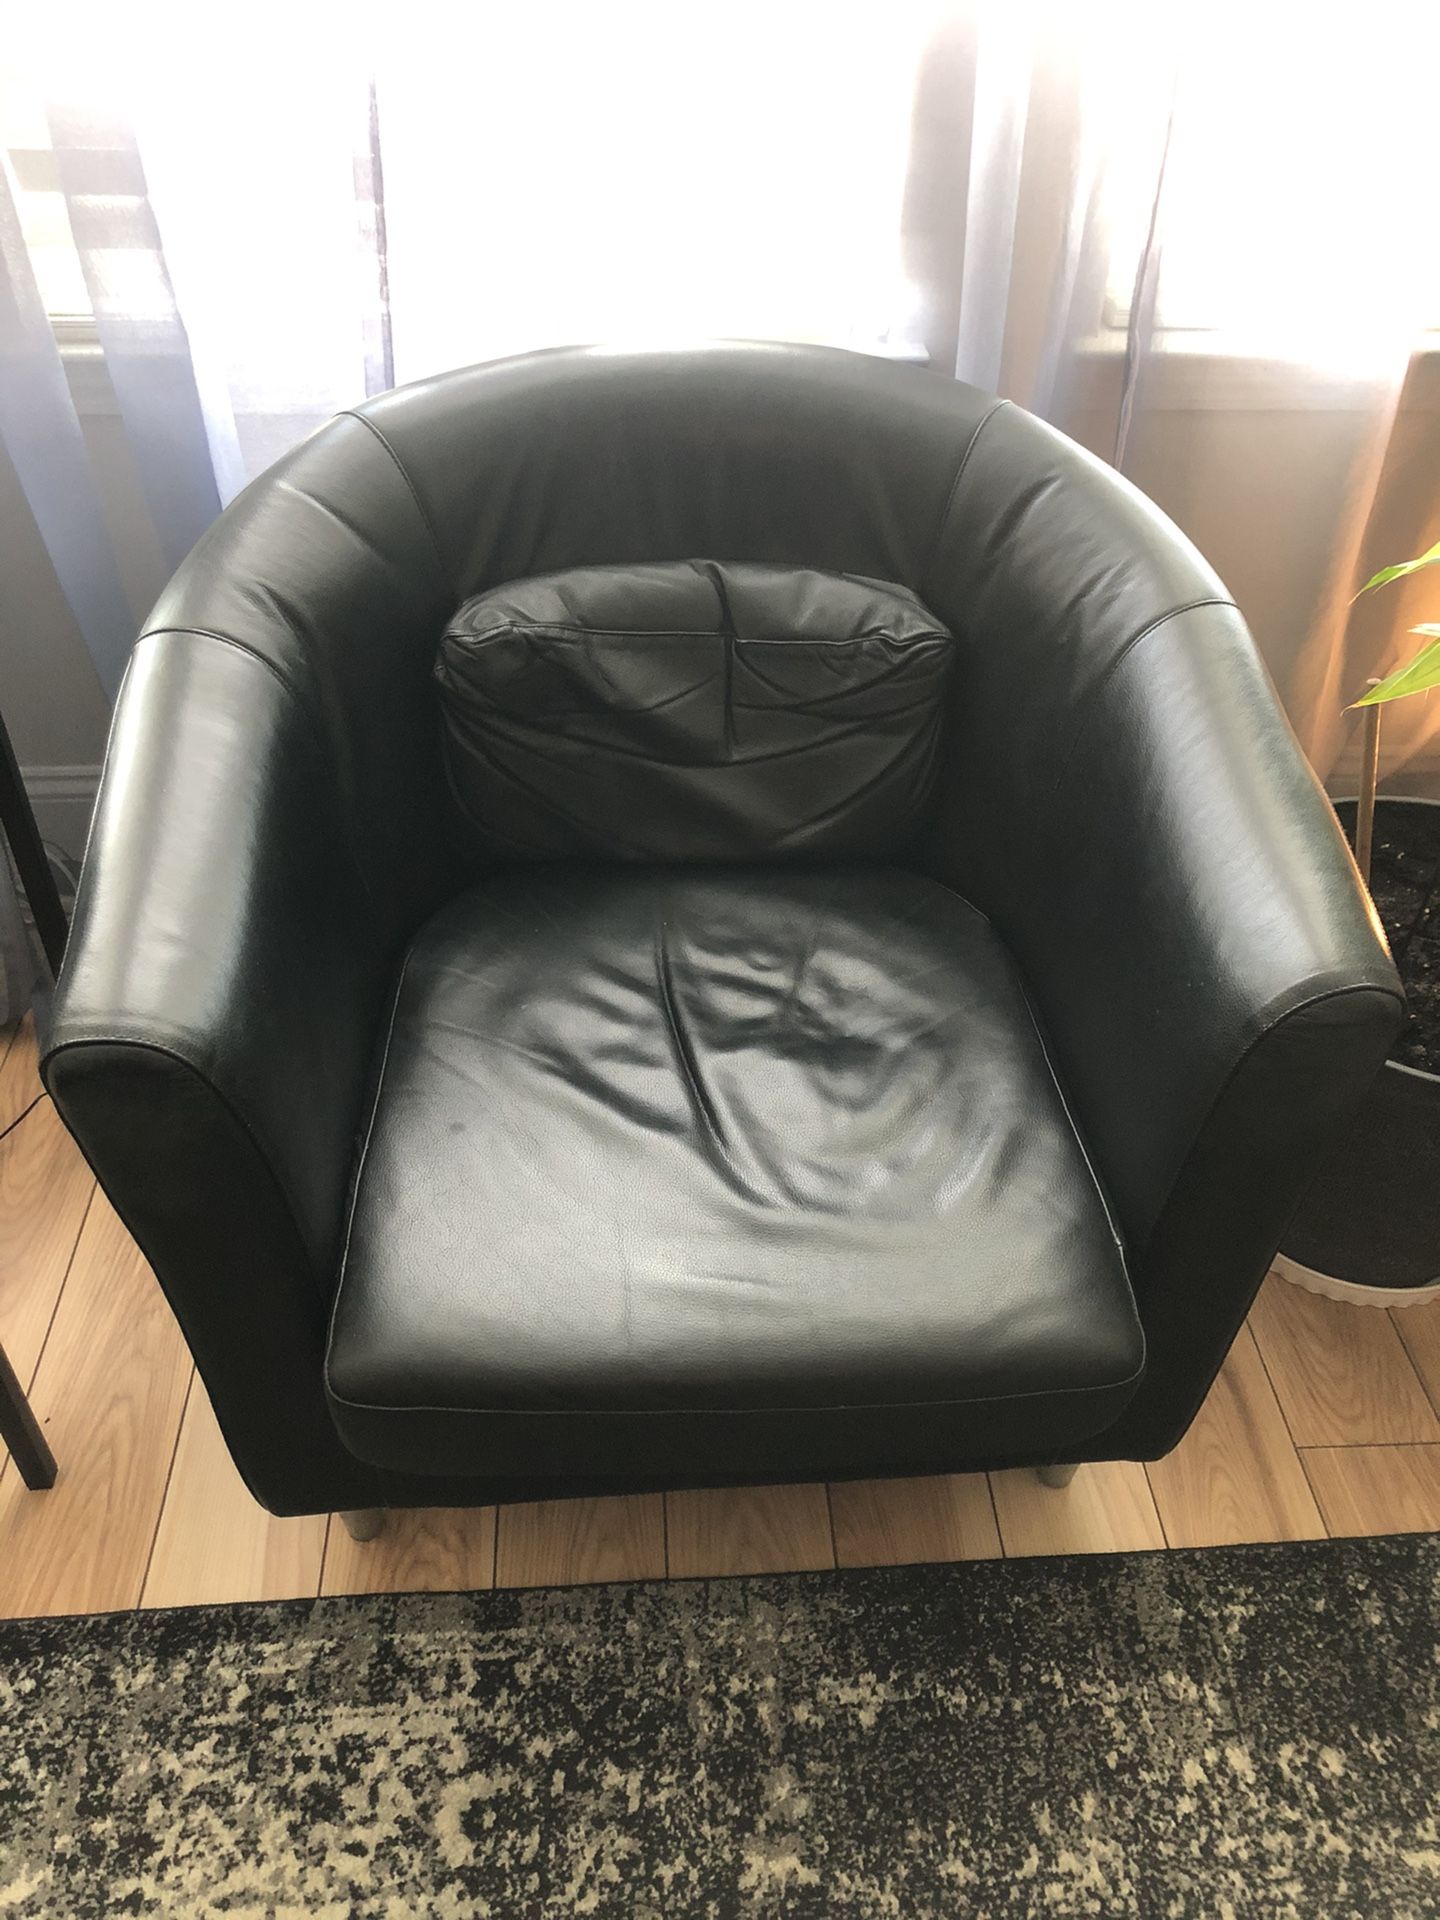 2 IKEA Leather Arm Chairs